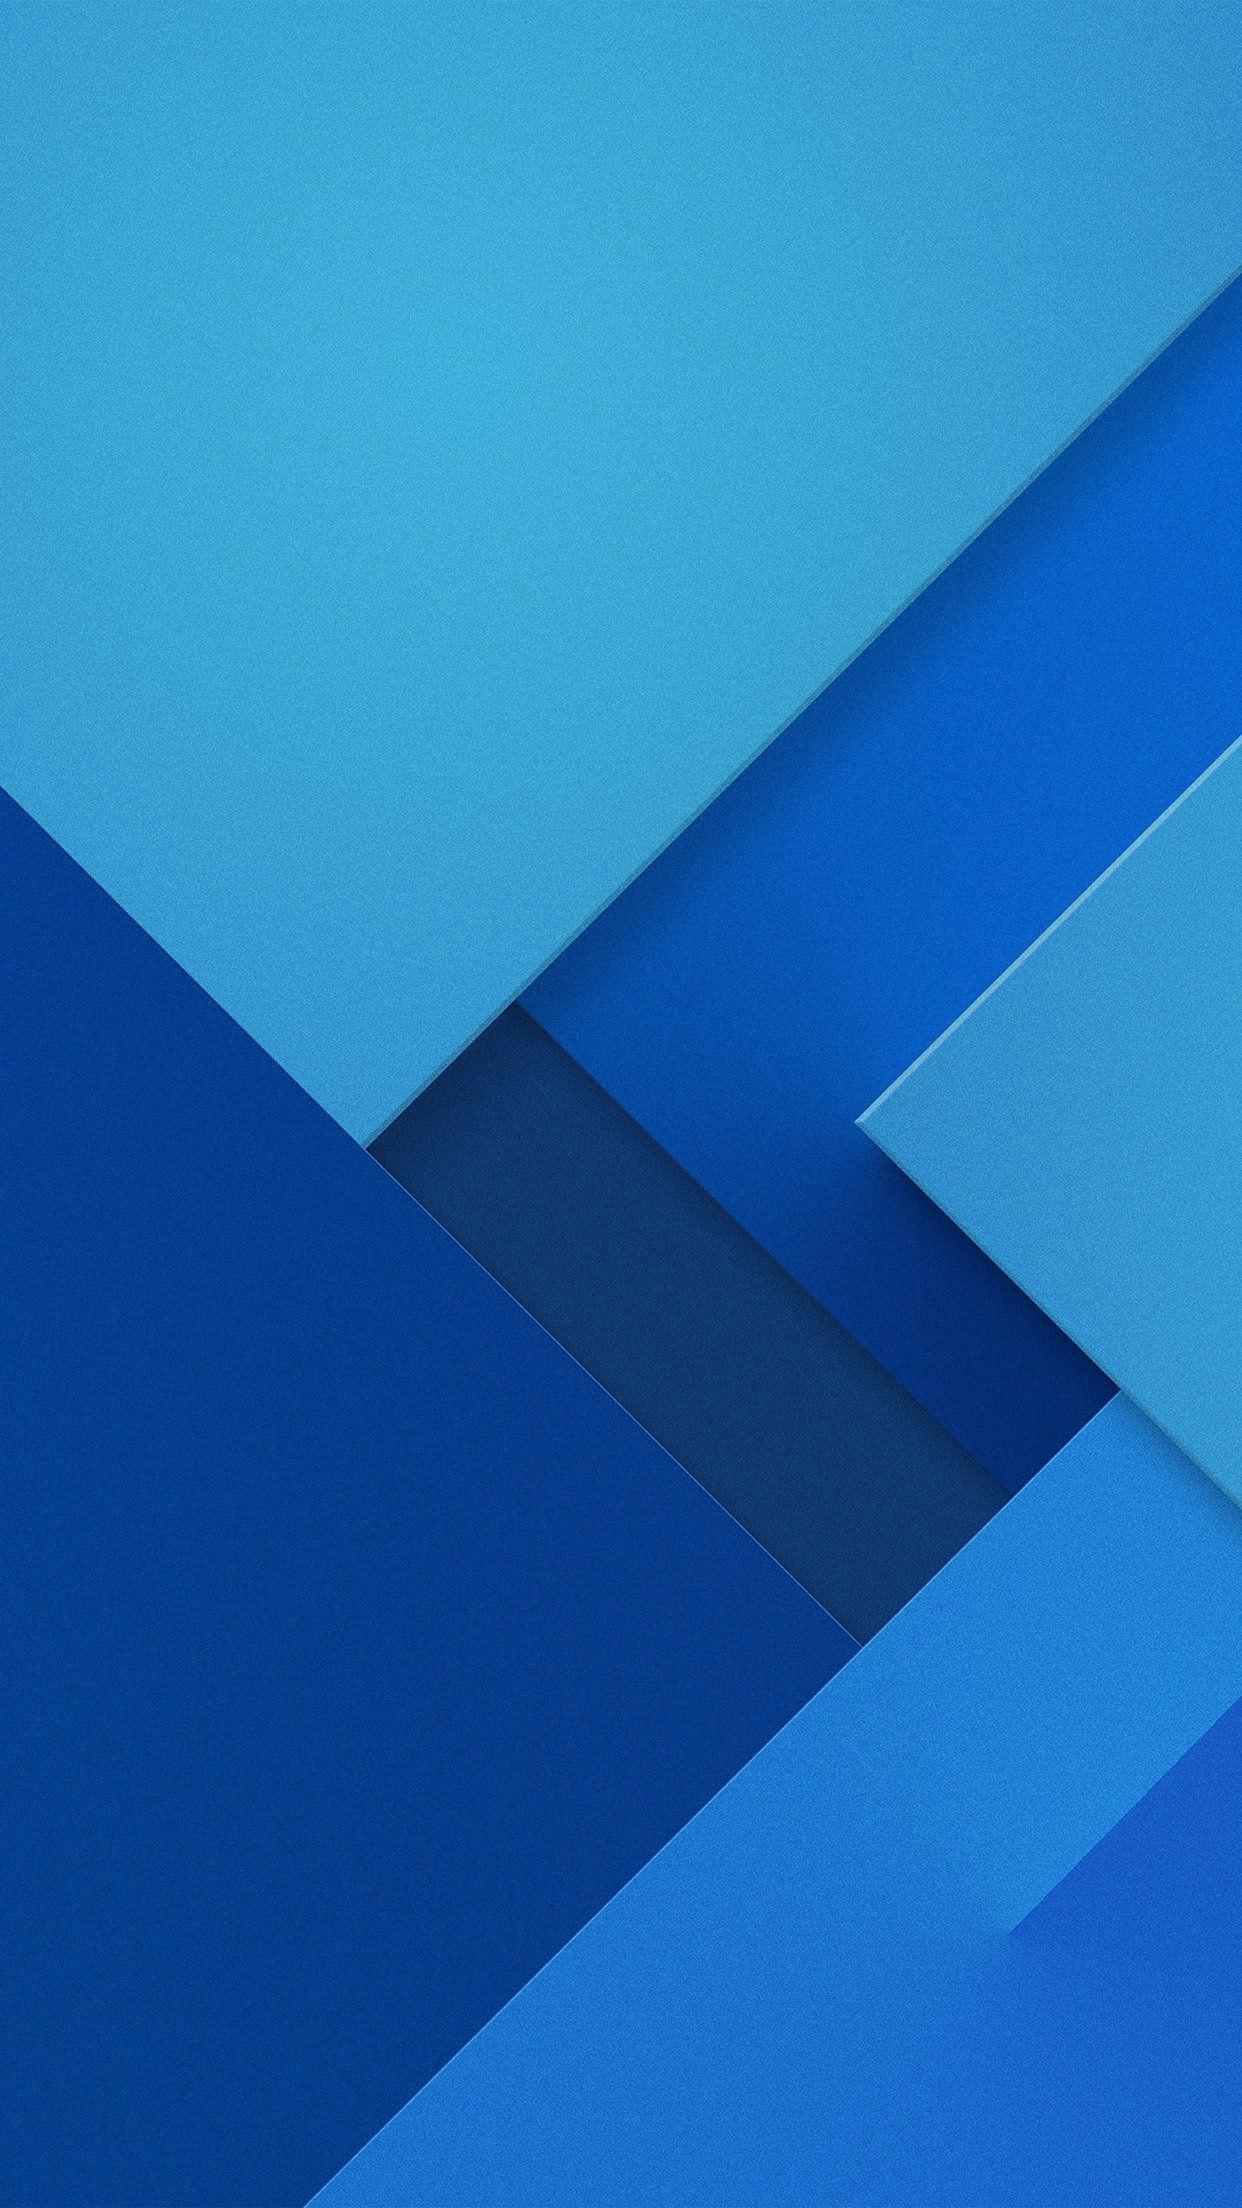 Samsung Galaxy 7 Edge Blue Abstract Pattern Android wallpaper